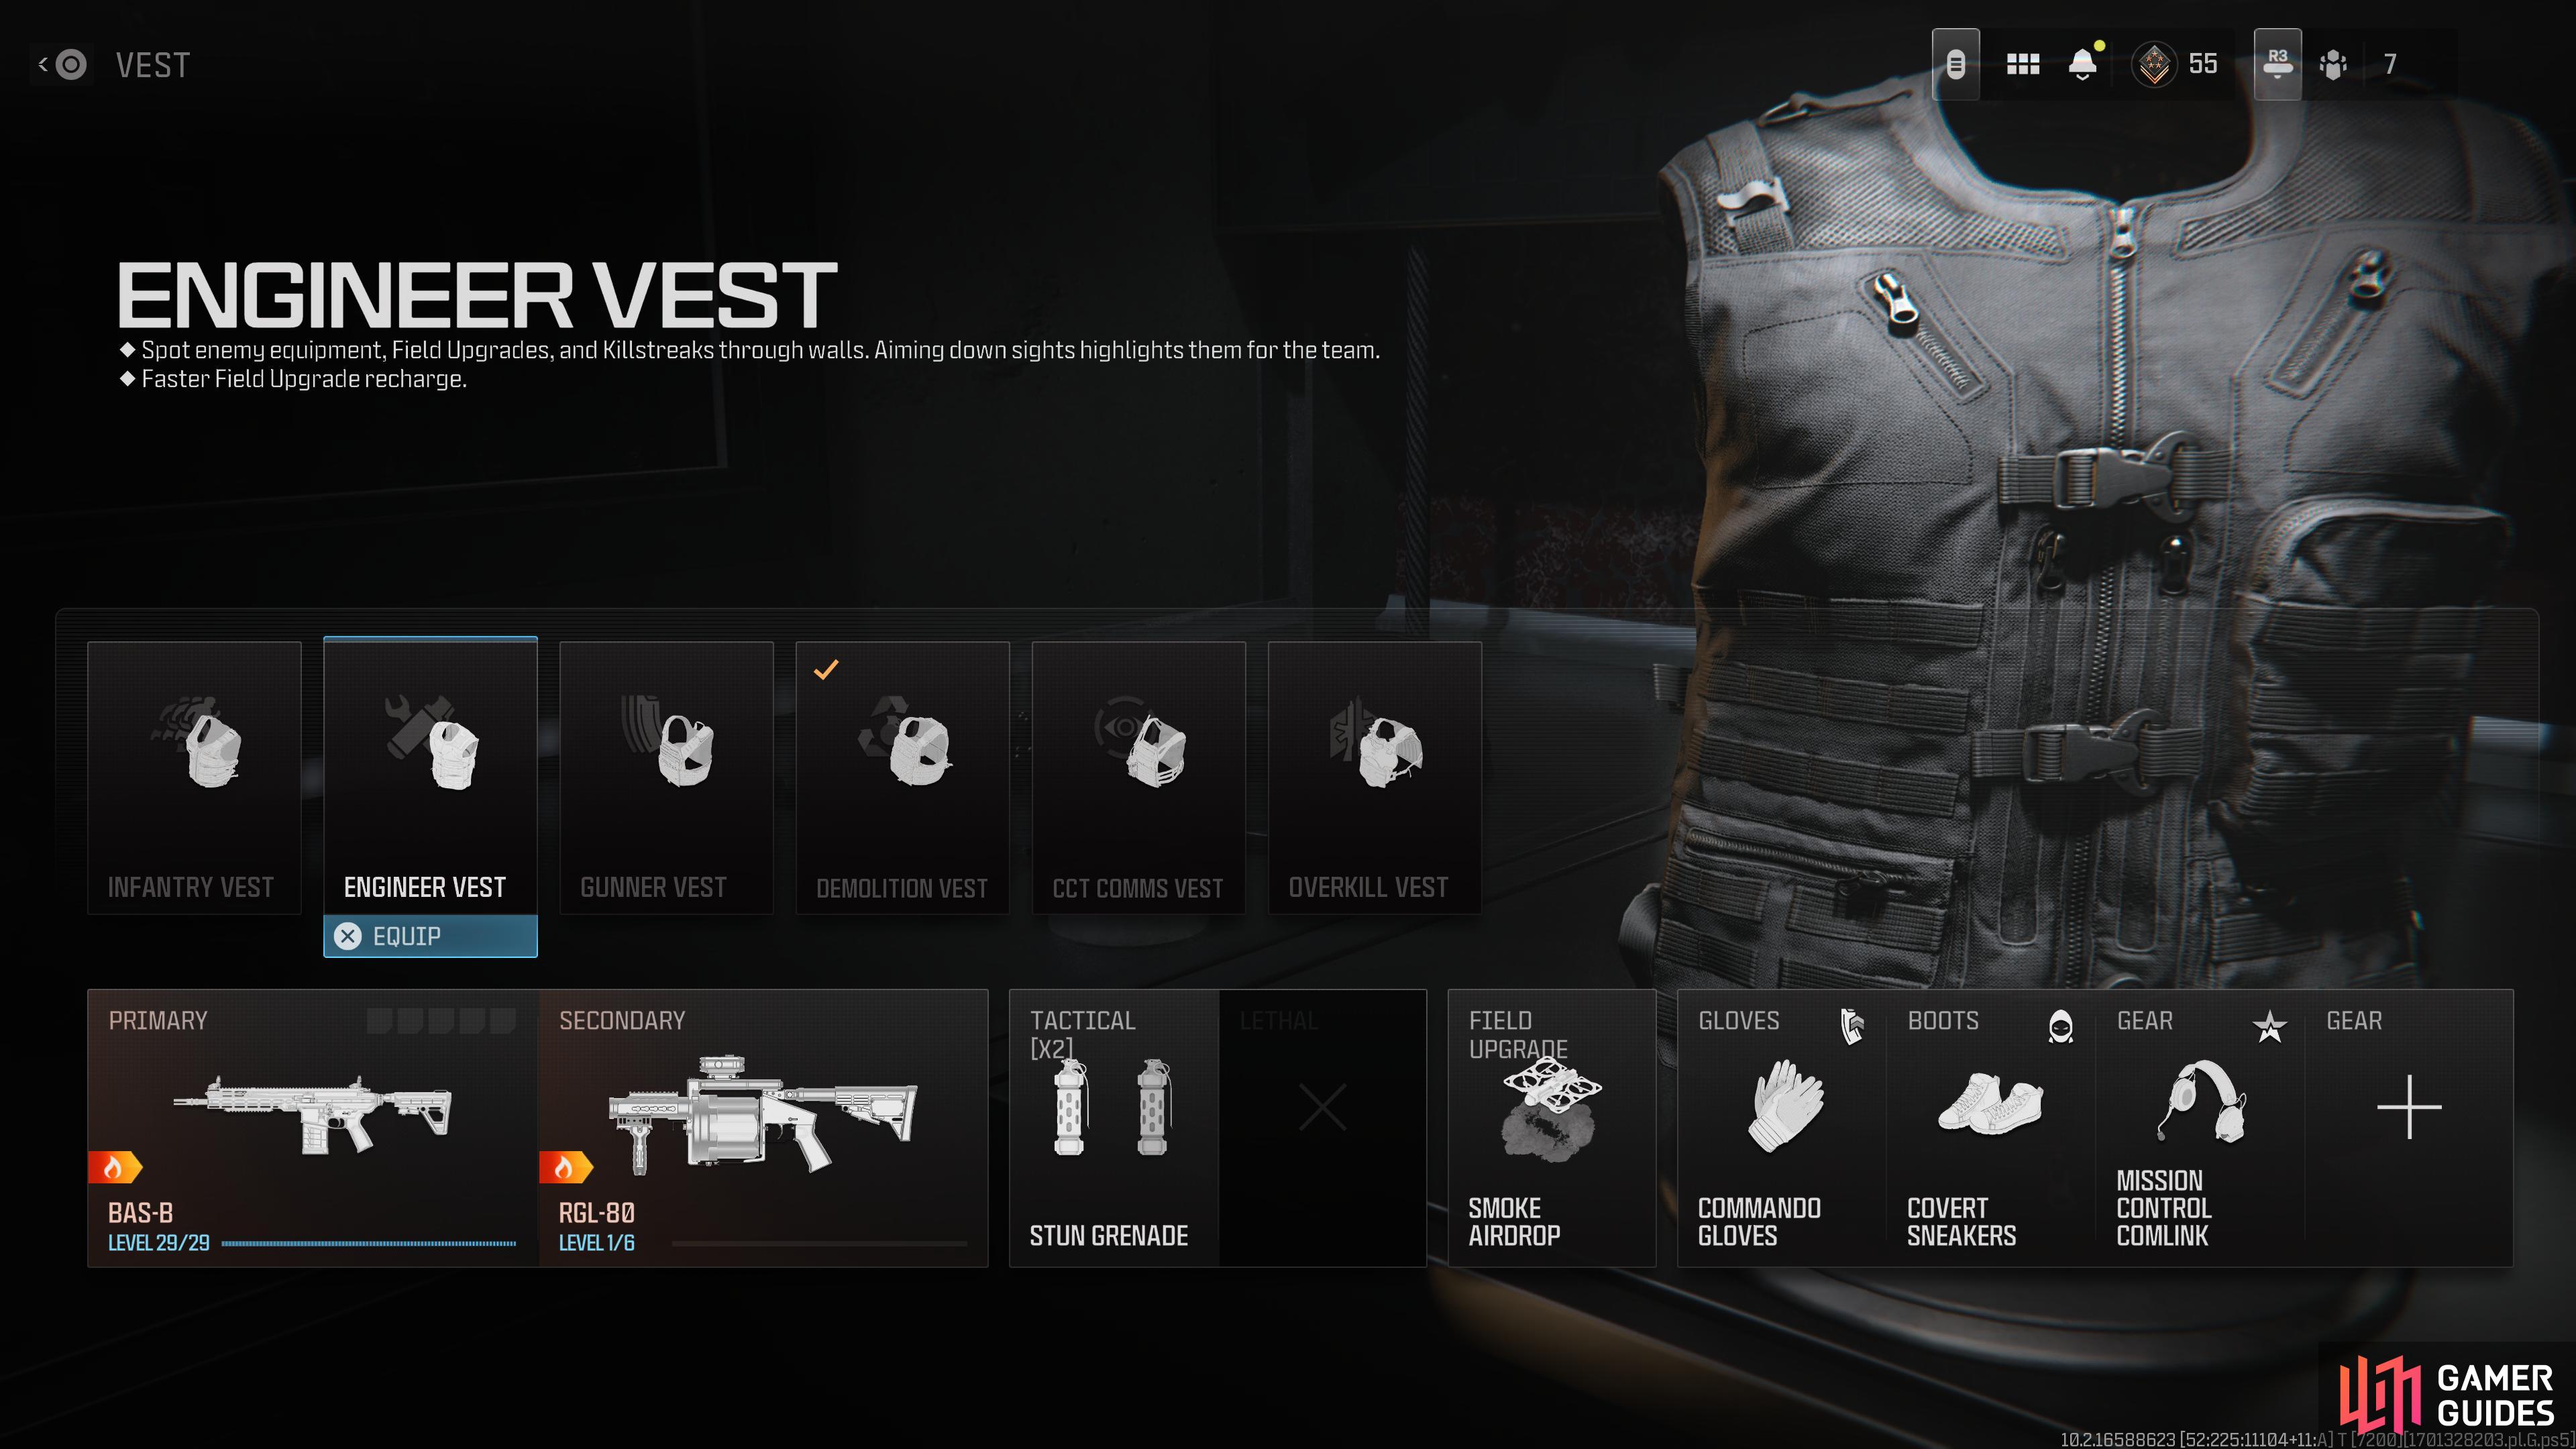 You'll want to equip the Engineer Vest as it'll allow you to see Field Equipment.